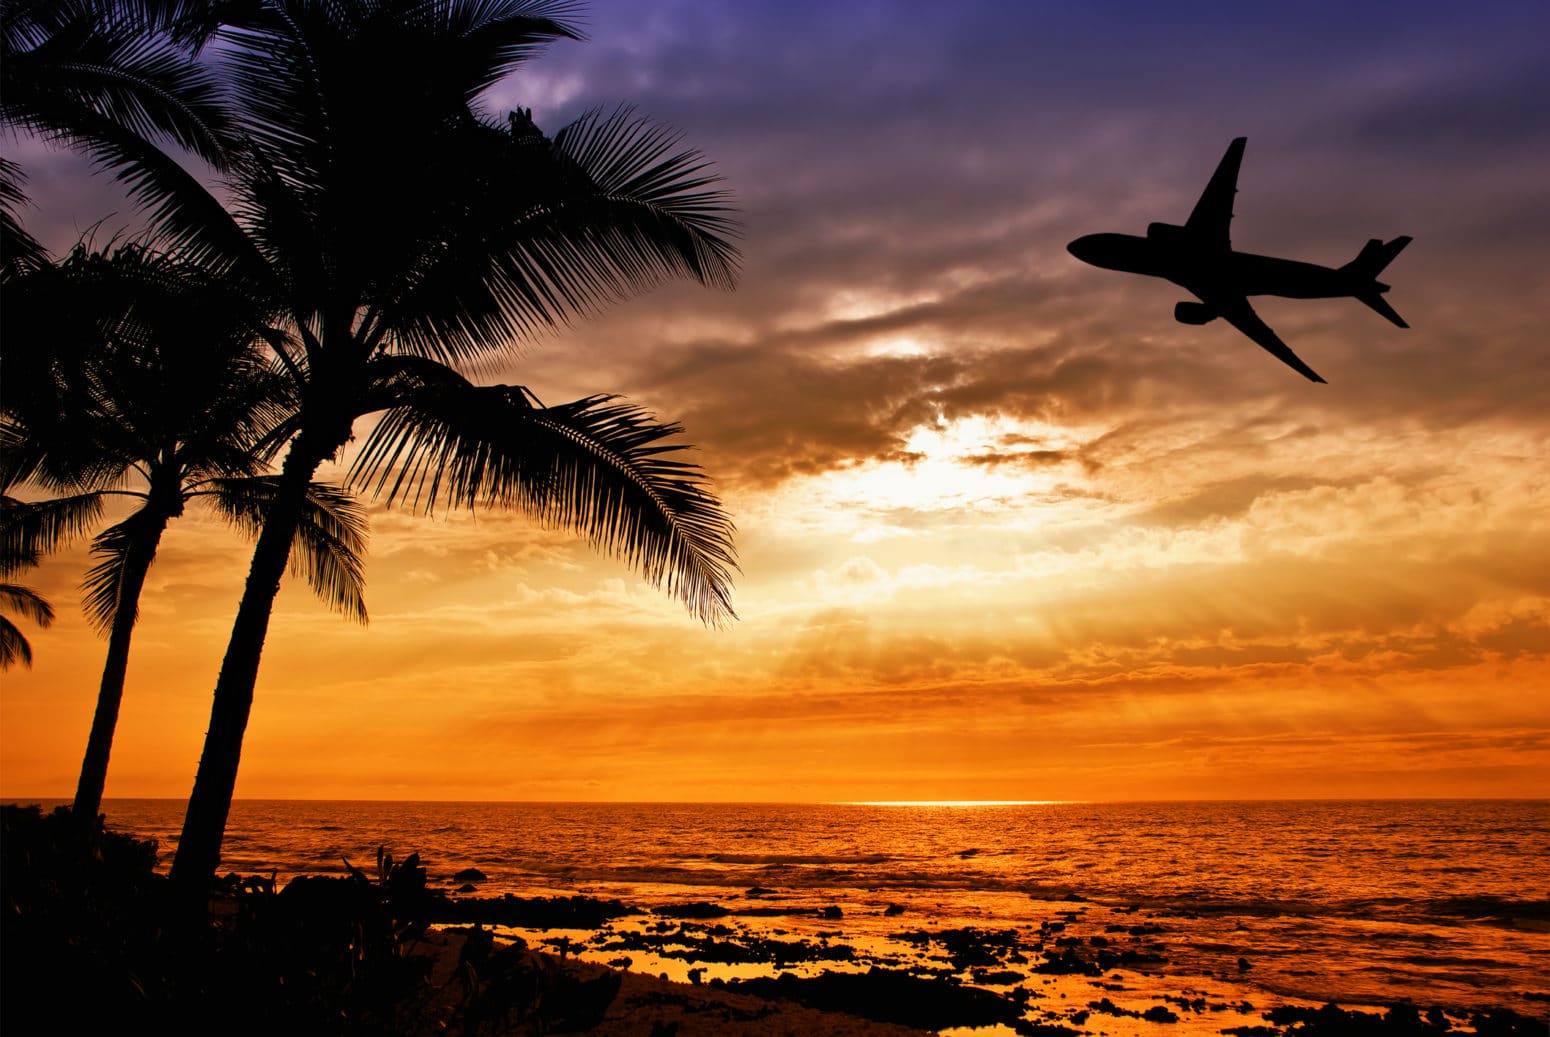 plane flying close to shoreline of beach with palm trees and water crashing in the foreground